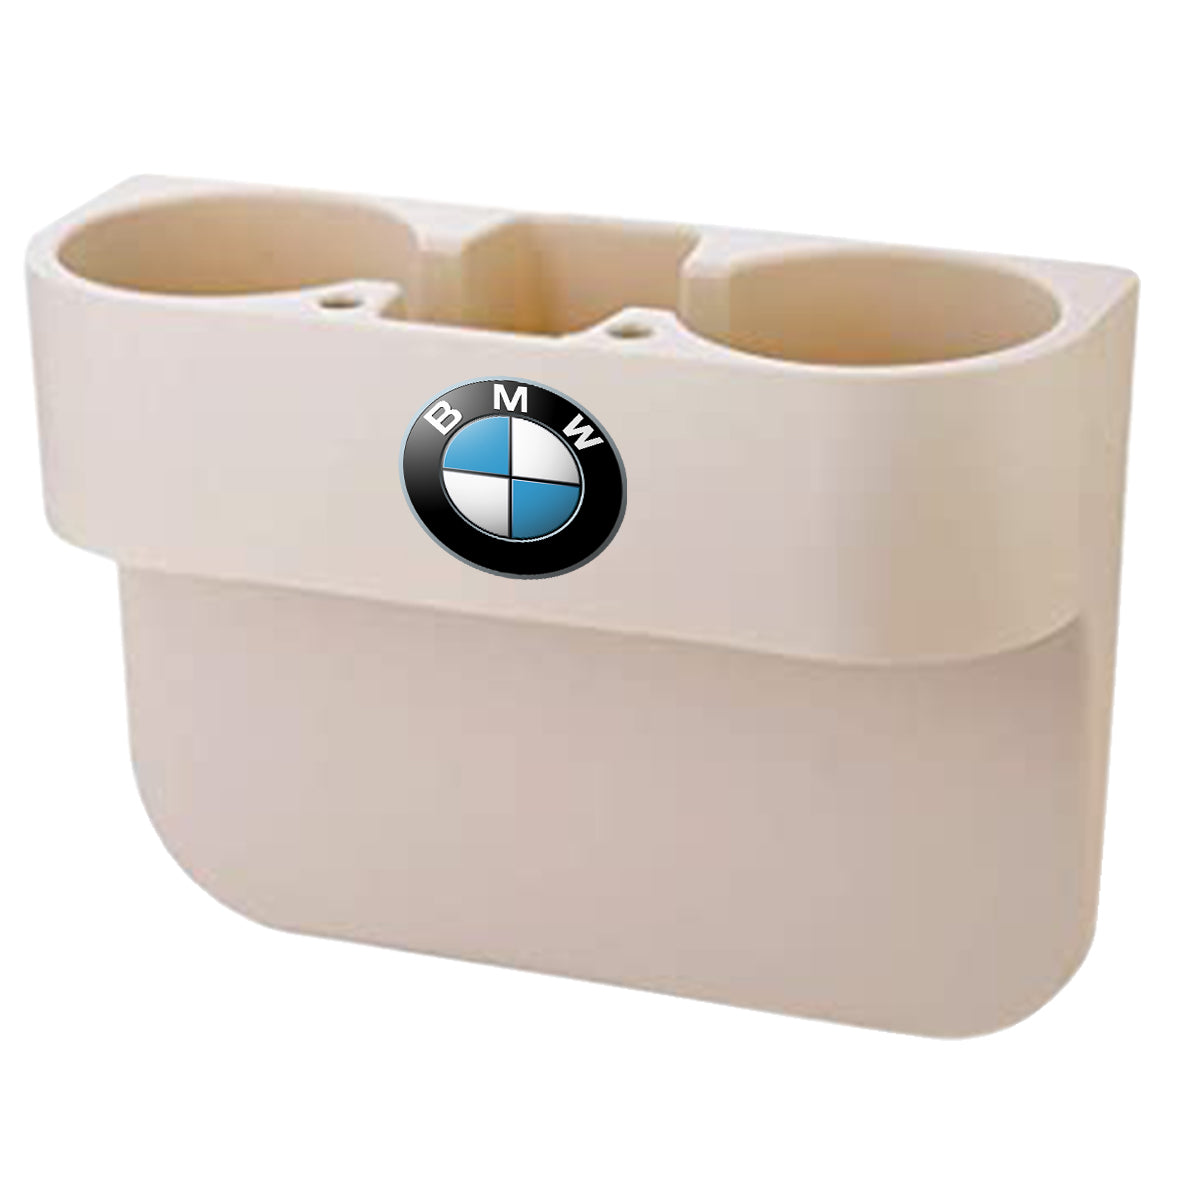 Cup Holder Portable Multifunction Vehicle Seat Cup Cell Phone Drinks Holder Box Car Interior Organizer, Custom For Your Cars, Car Accessories KX11995